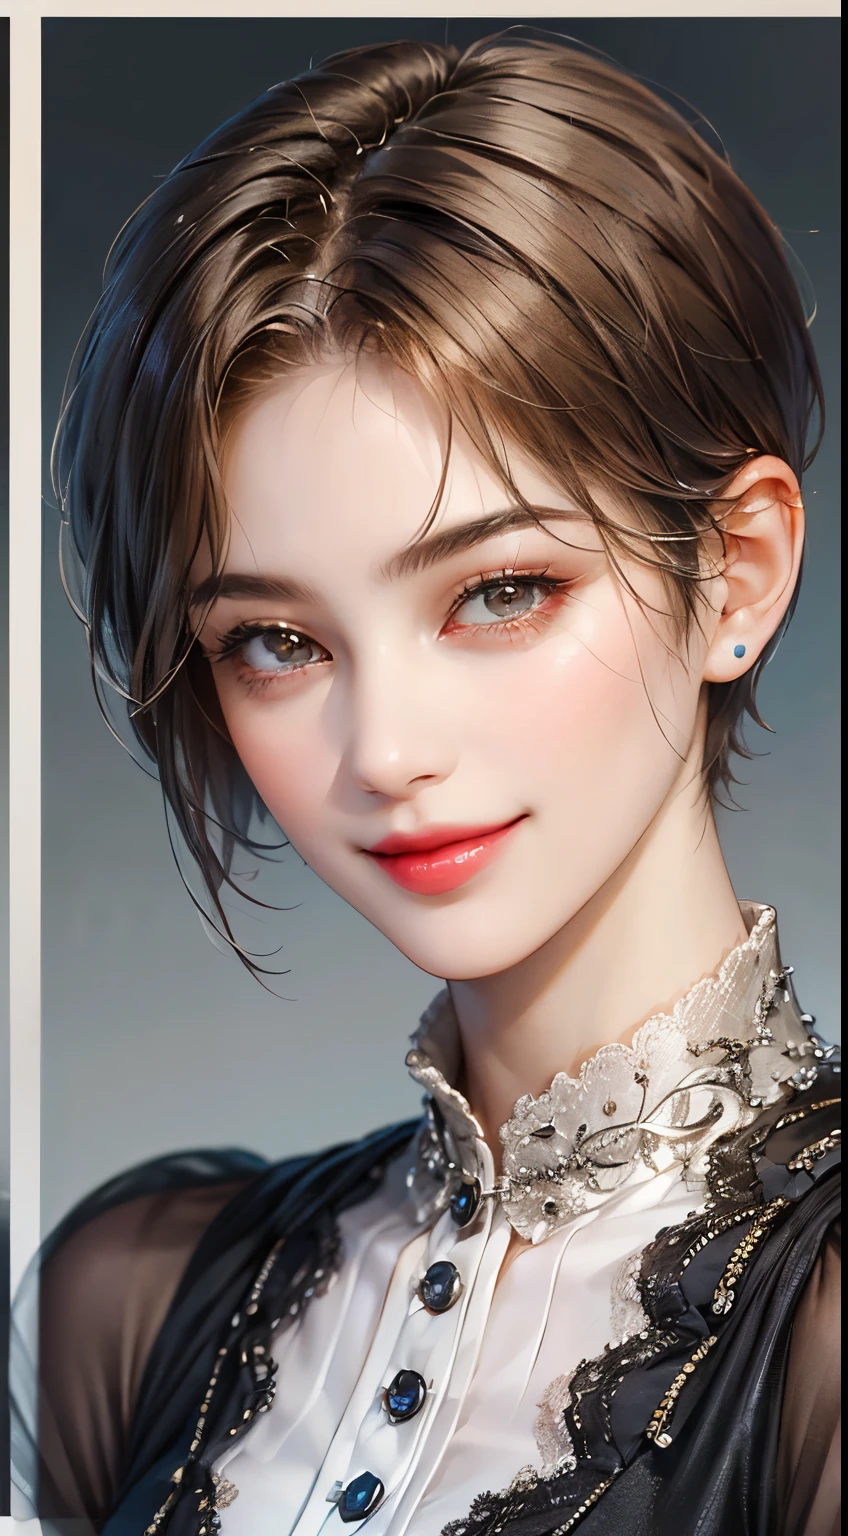 143
(a 20 yo woman), (A hyper-realistic), (high-level image quality), ((beautiful hairstyle 46)), ((short-hair:1.46)), (kindly smile), (brest:1.1), (lipsticks)